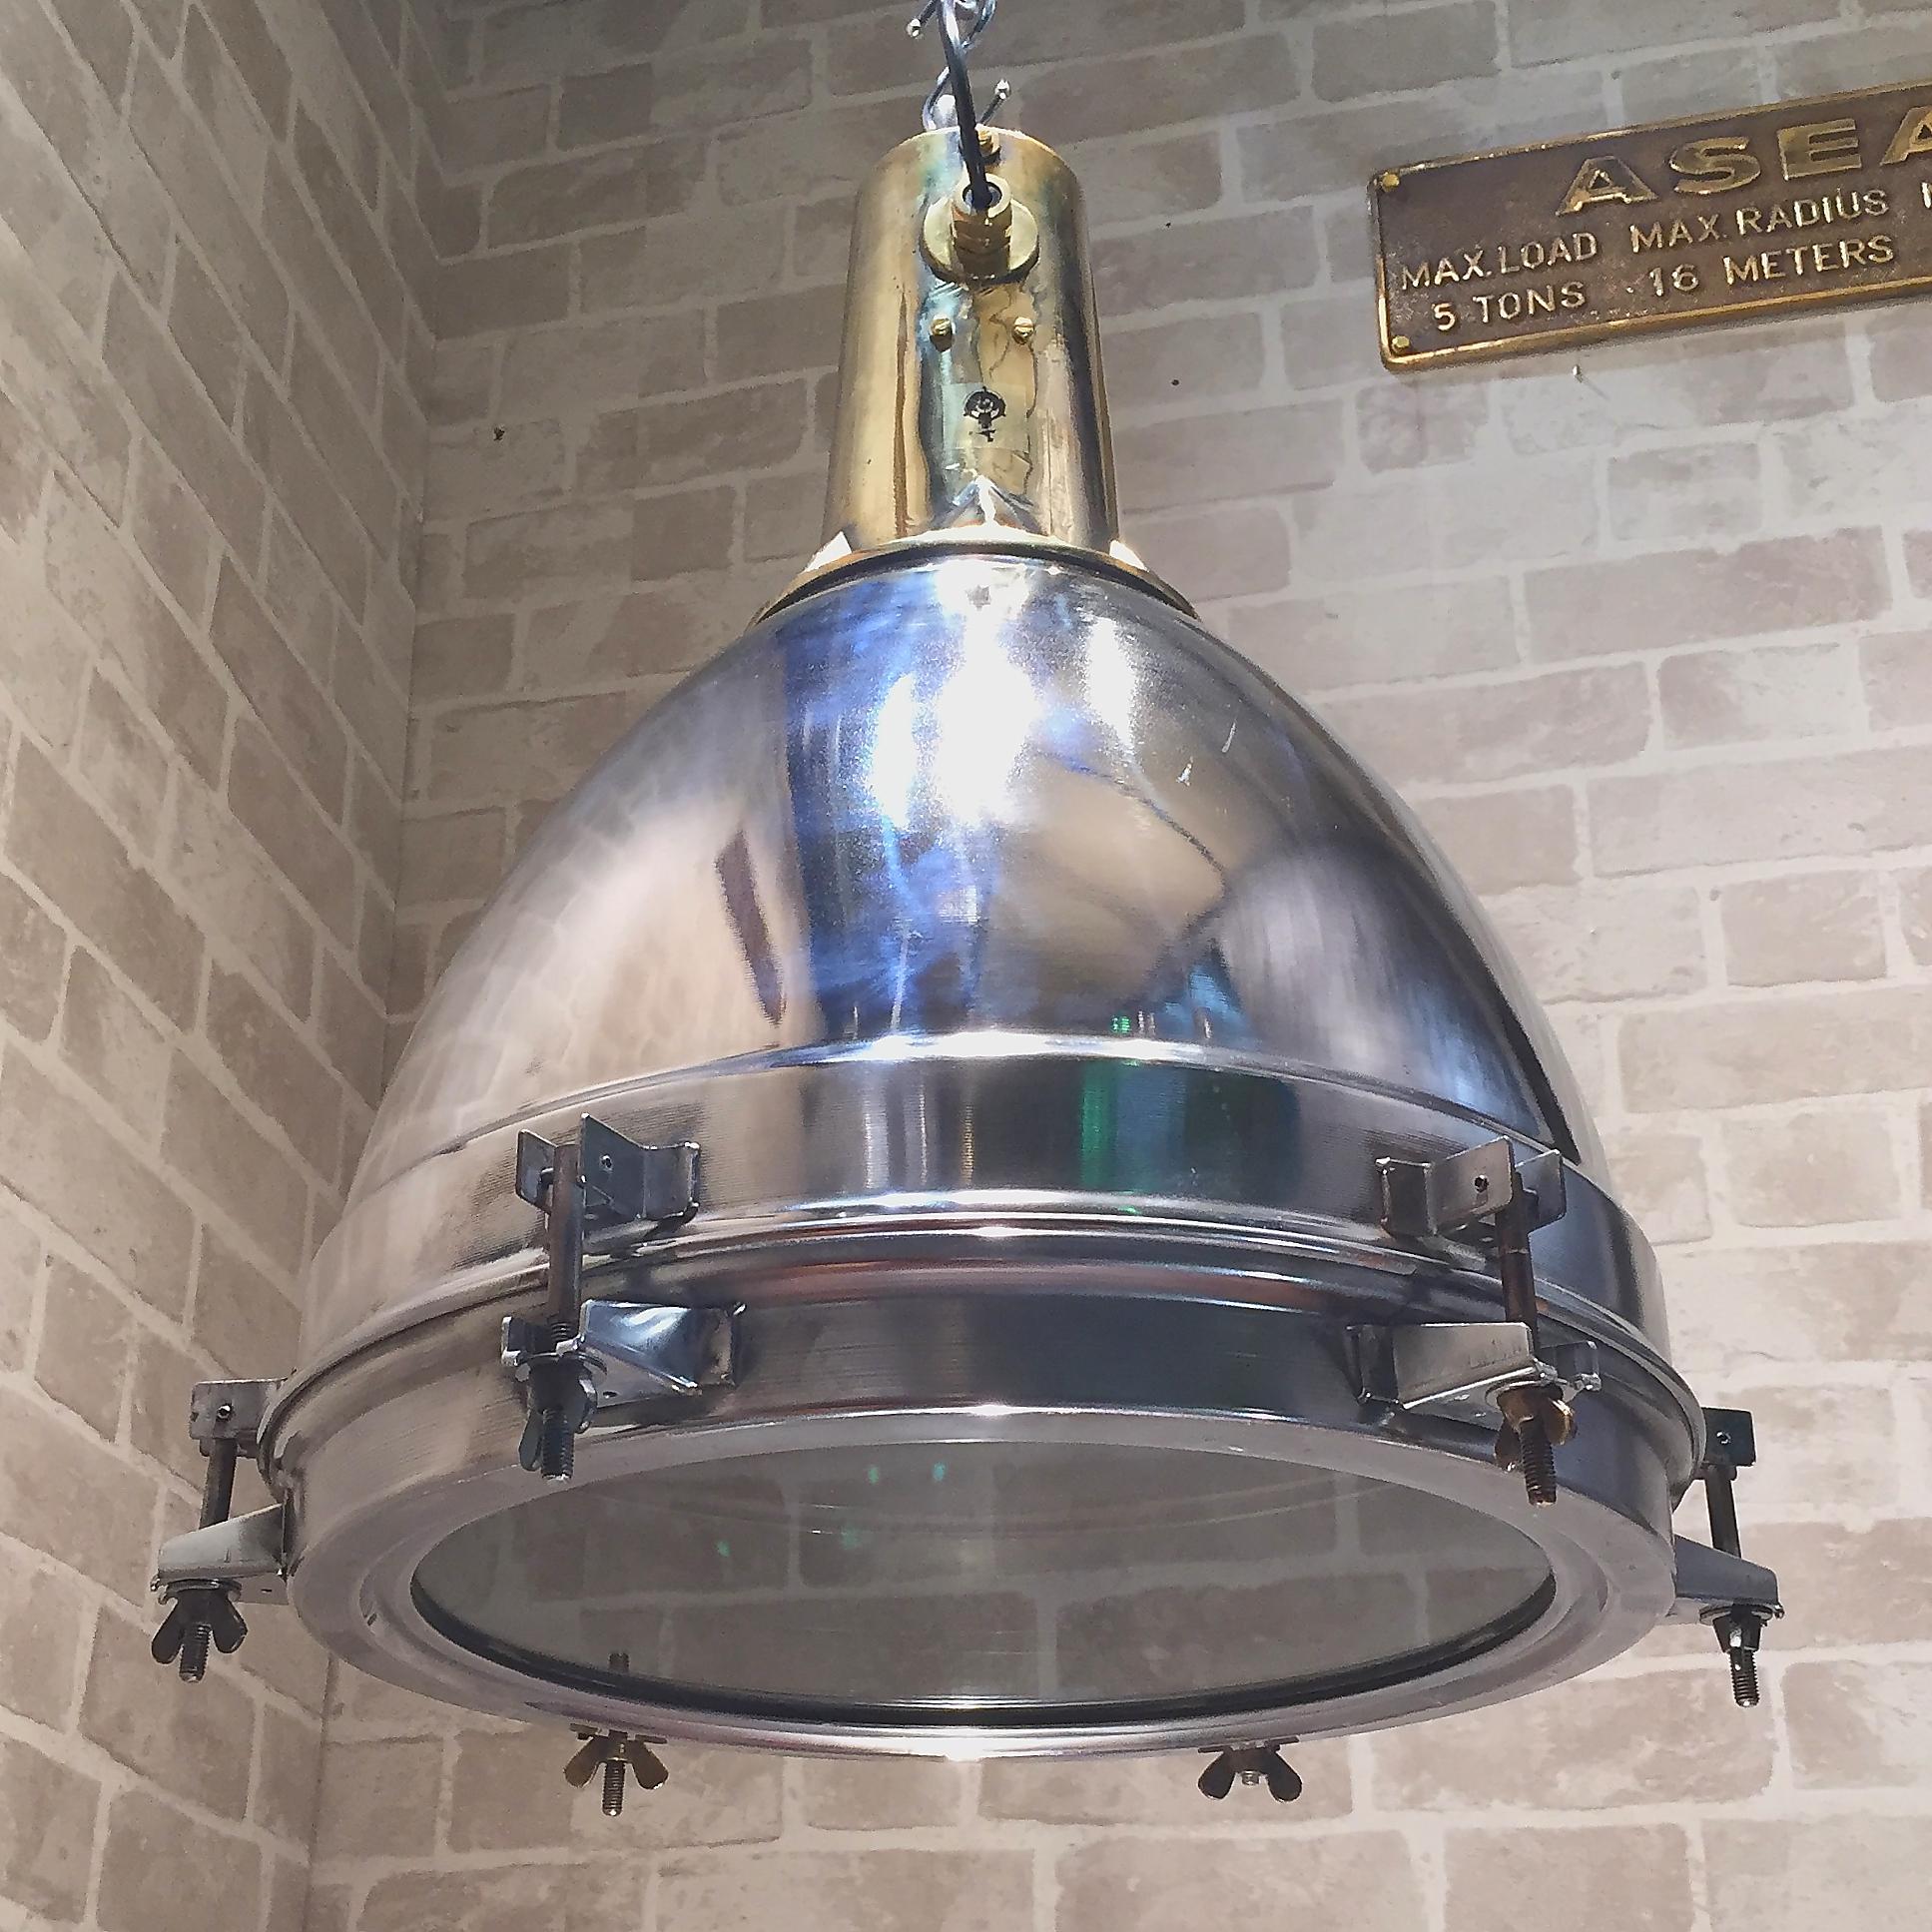 Original Stainless Steel, Cast Brass & Bronze Search Light Pendant Conversion
 
This very substantial fitting was salvaged from an old Japanese cargo ship, built during the 1970’s and is of outstanding build quality.
 
The Stainless dome is spun